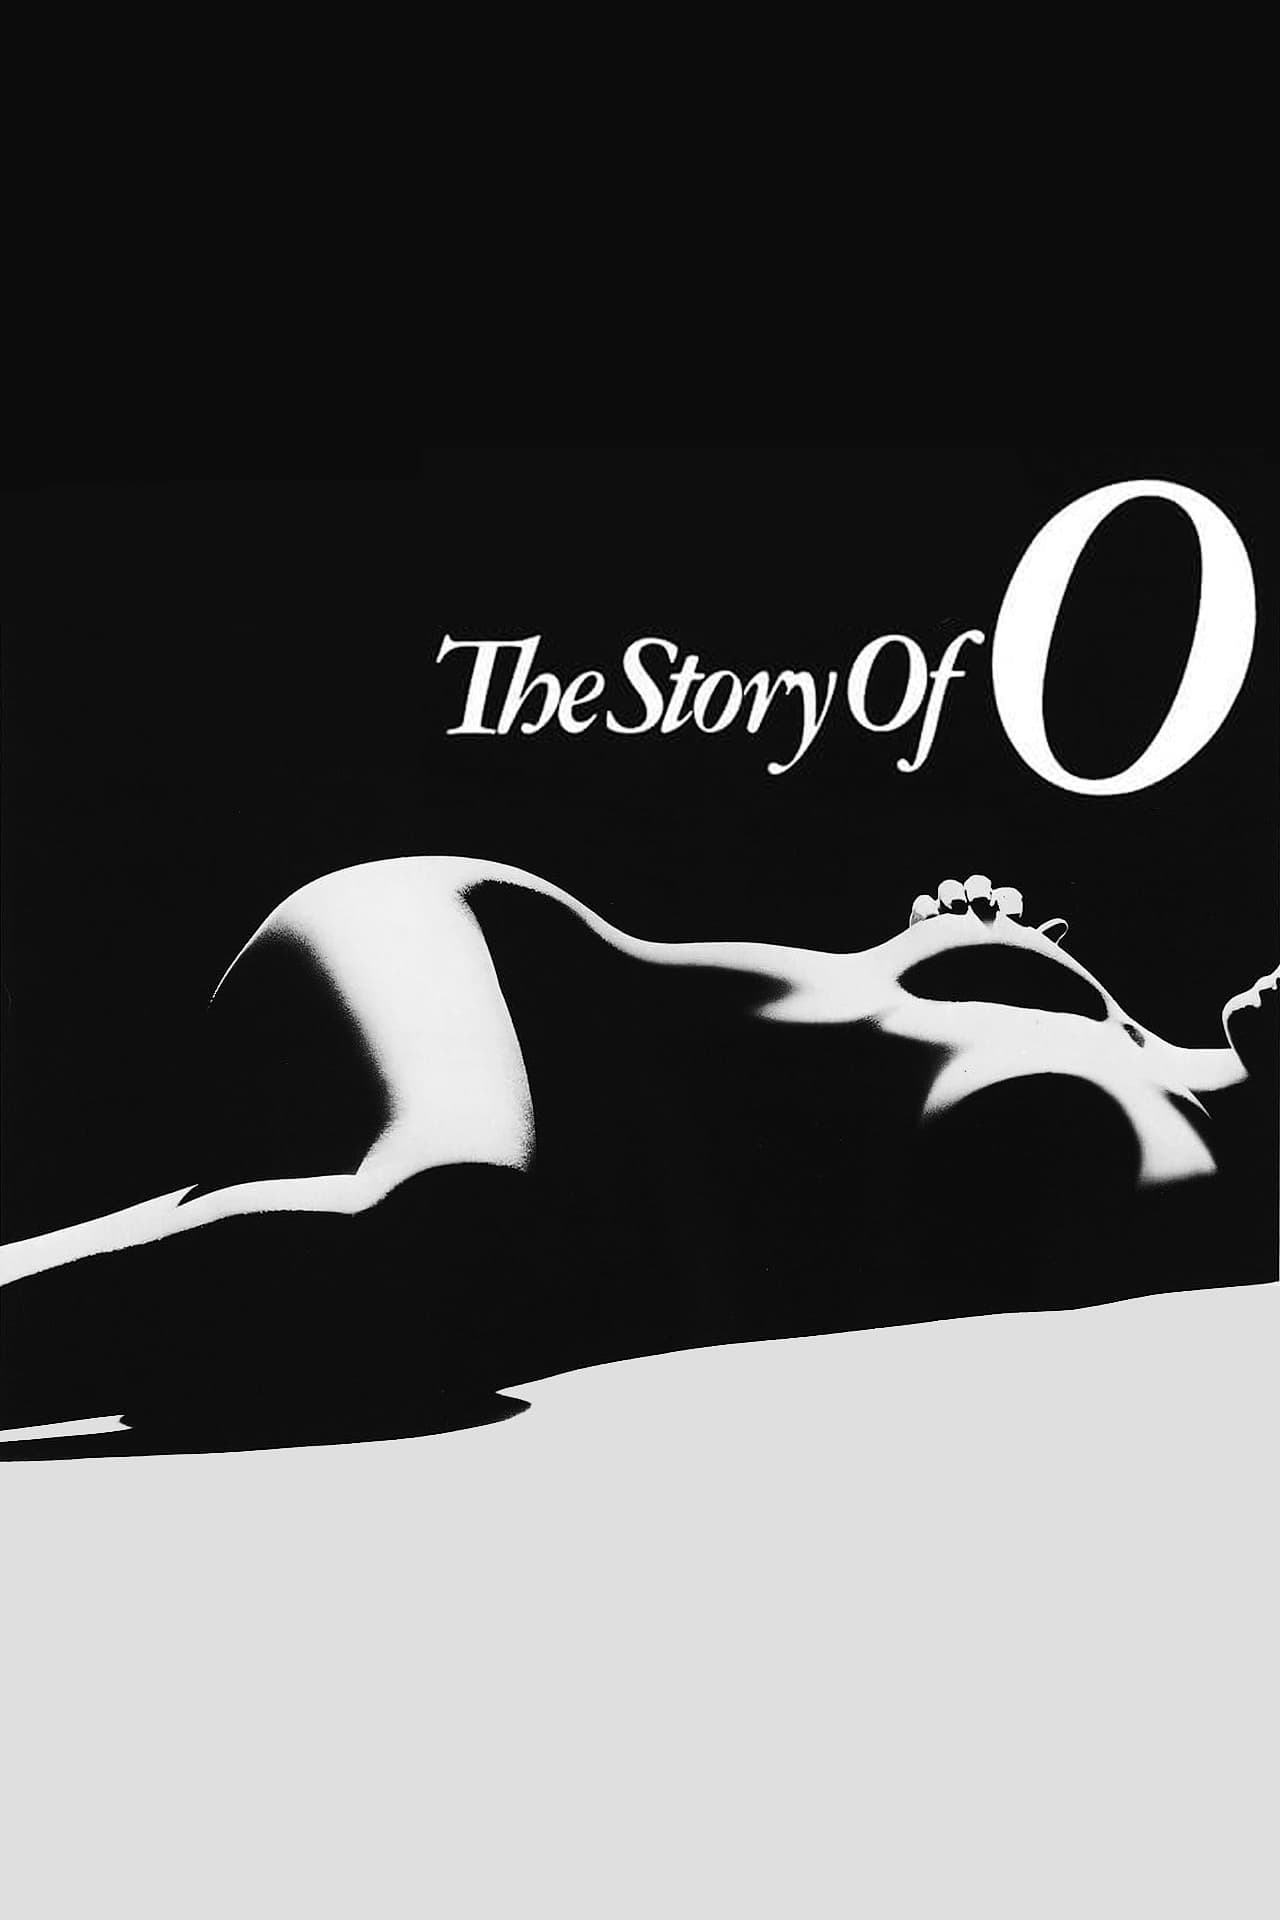 The Story of O (1975)